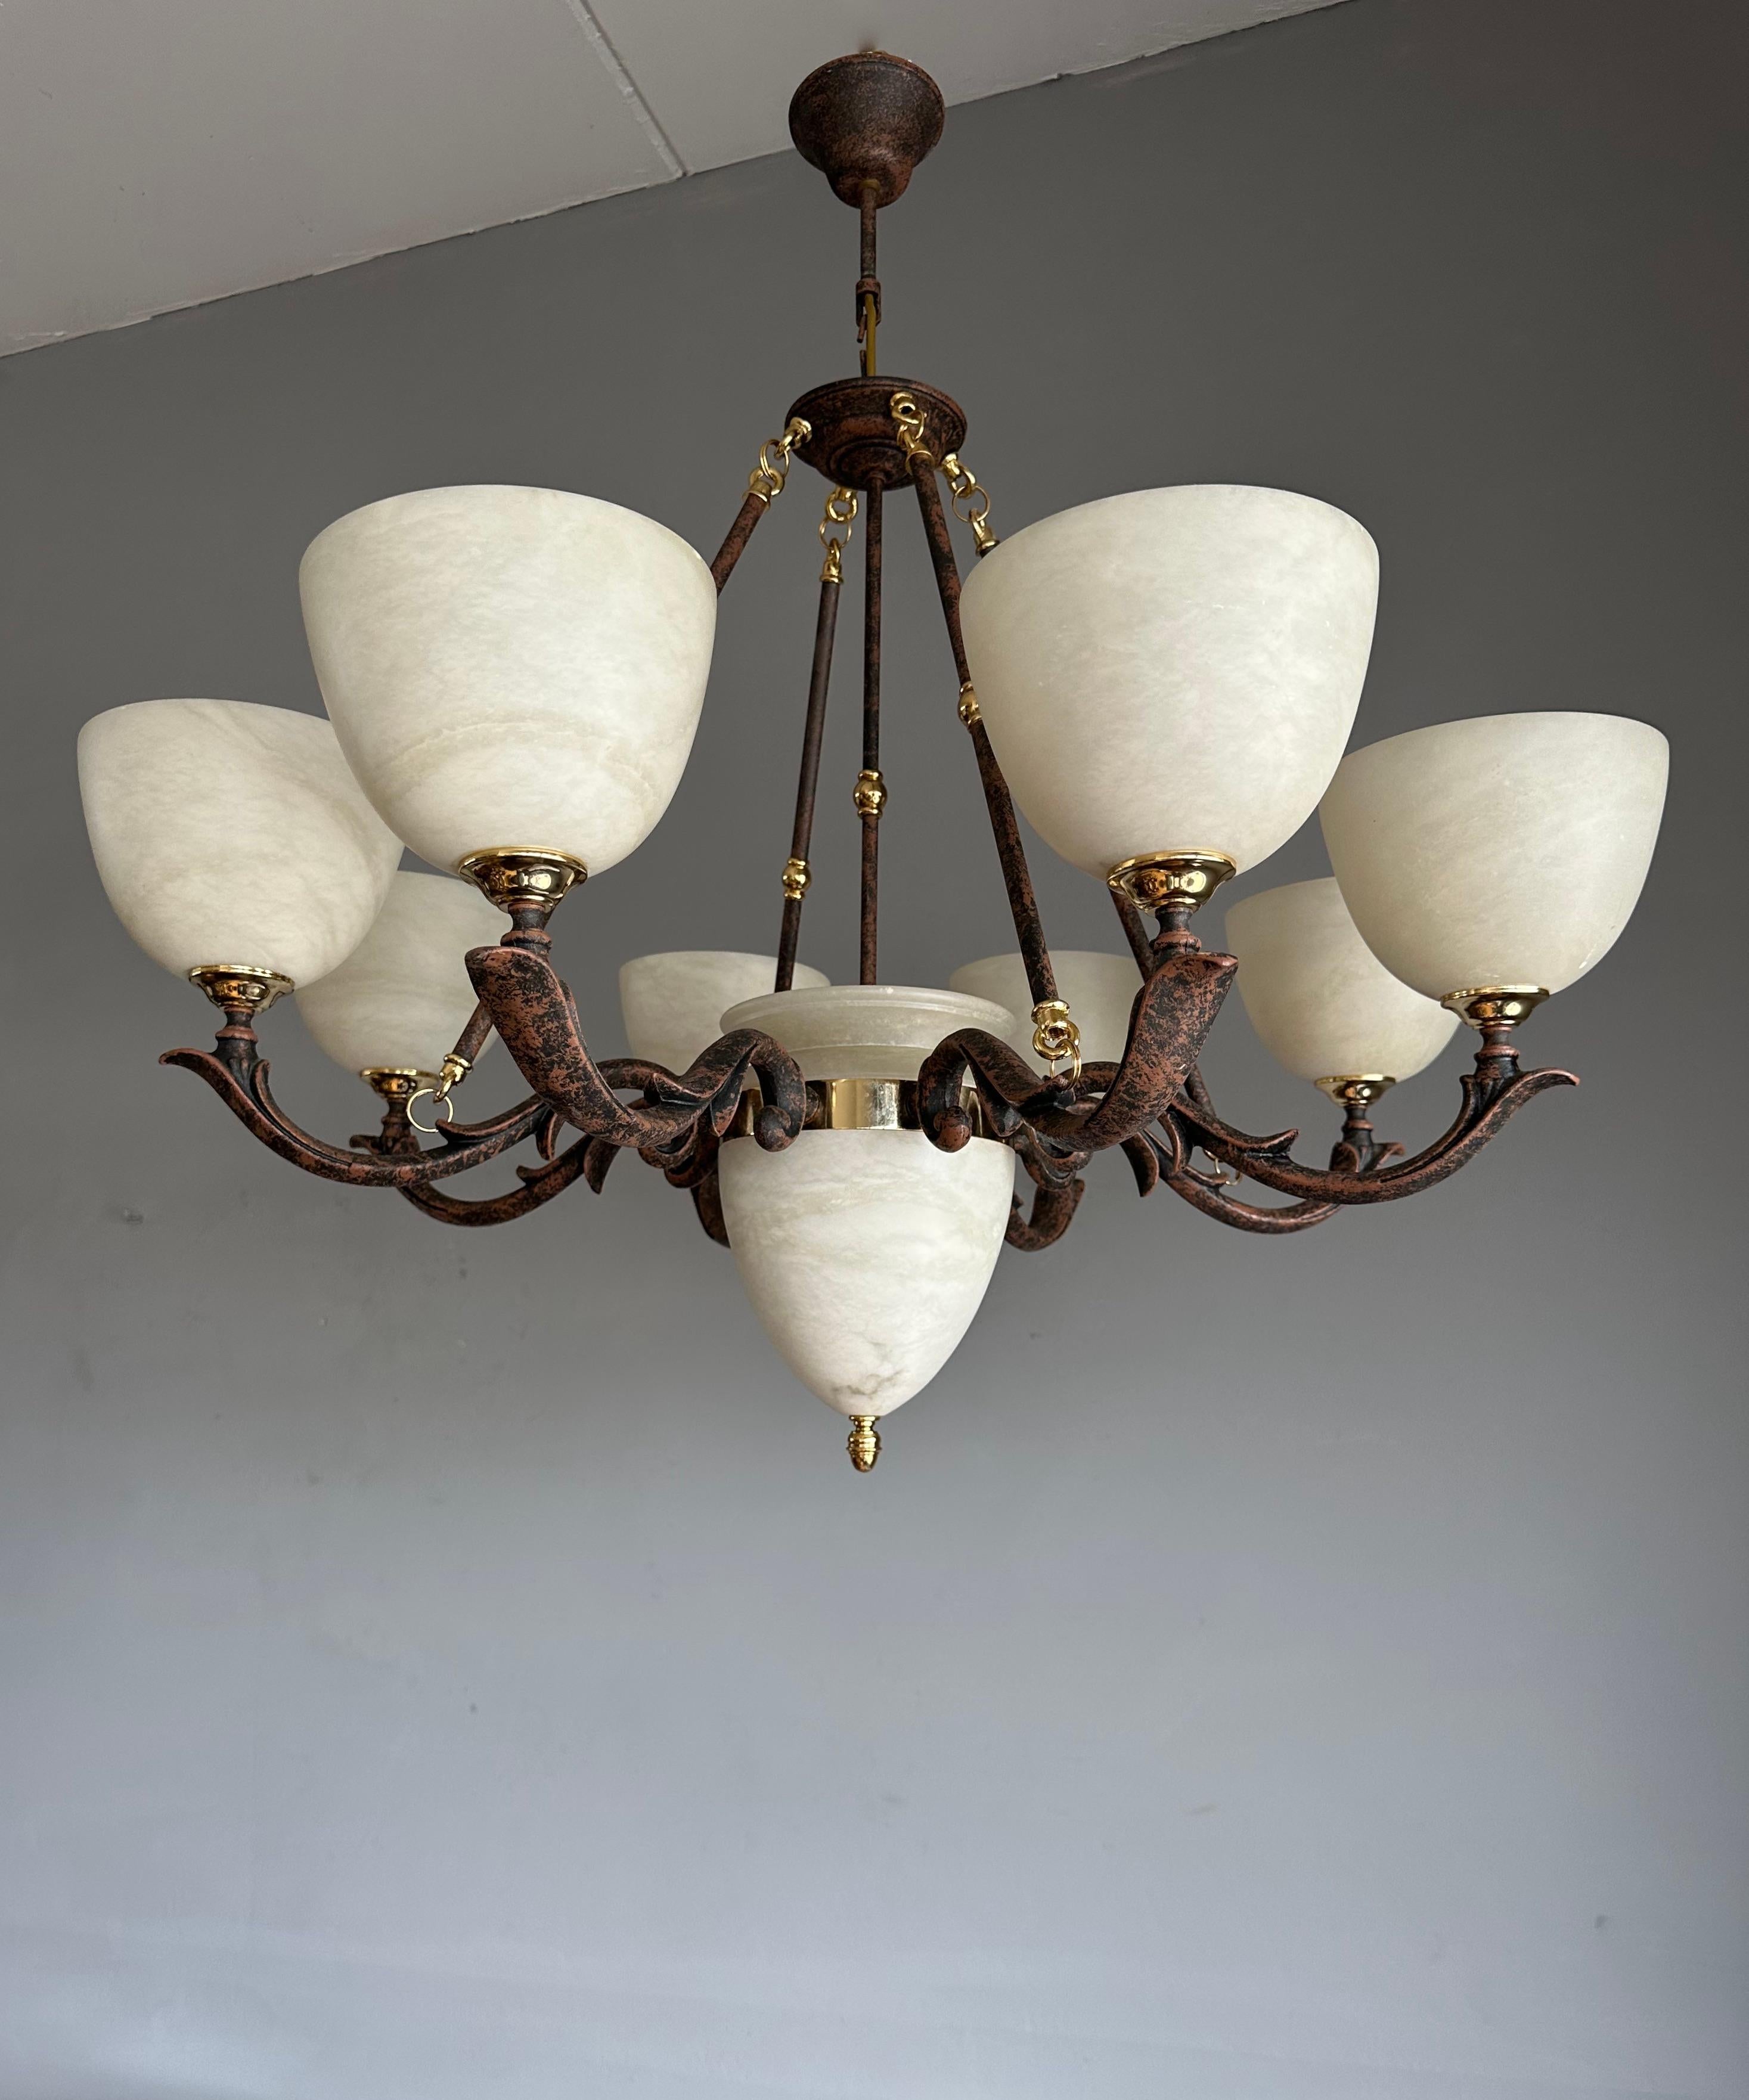 Grandiose & Unique Midcentury Made Alabaster 10-Light Pendant / Chandelier 1970s In Excellent Condition For Sale In Lisse, NL